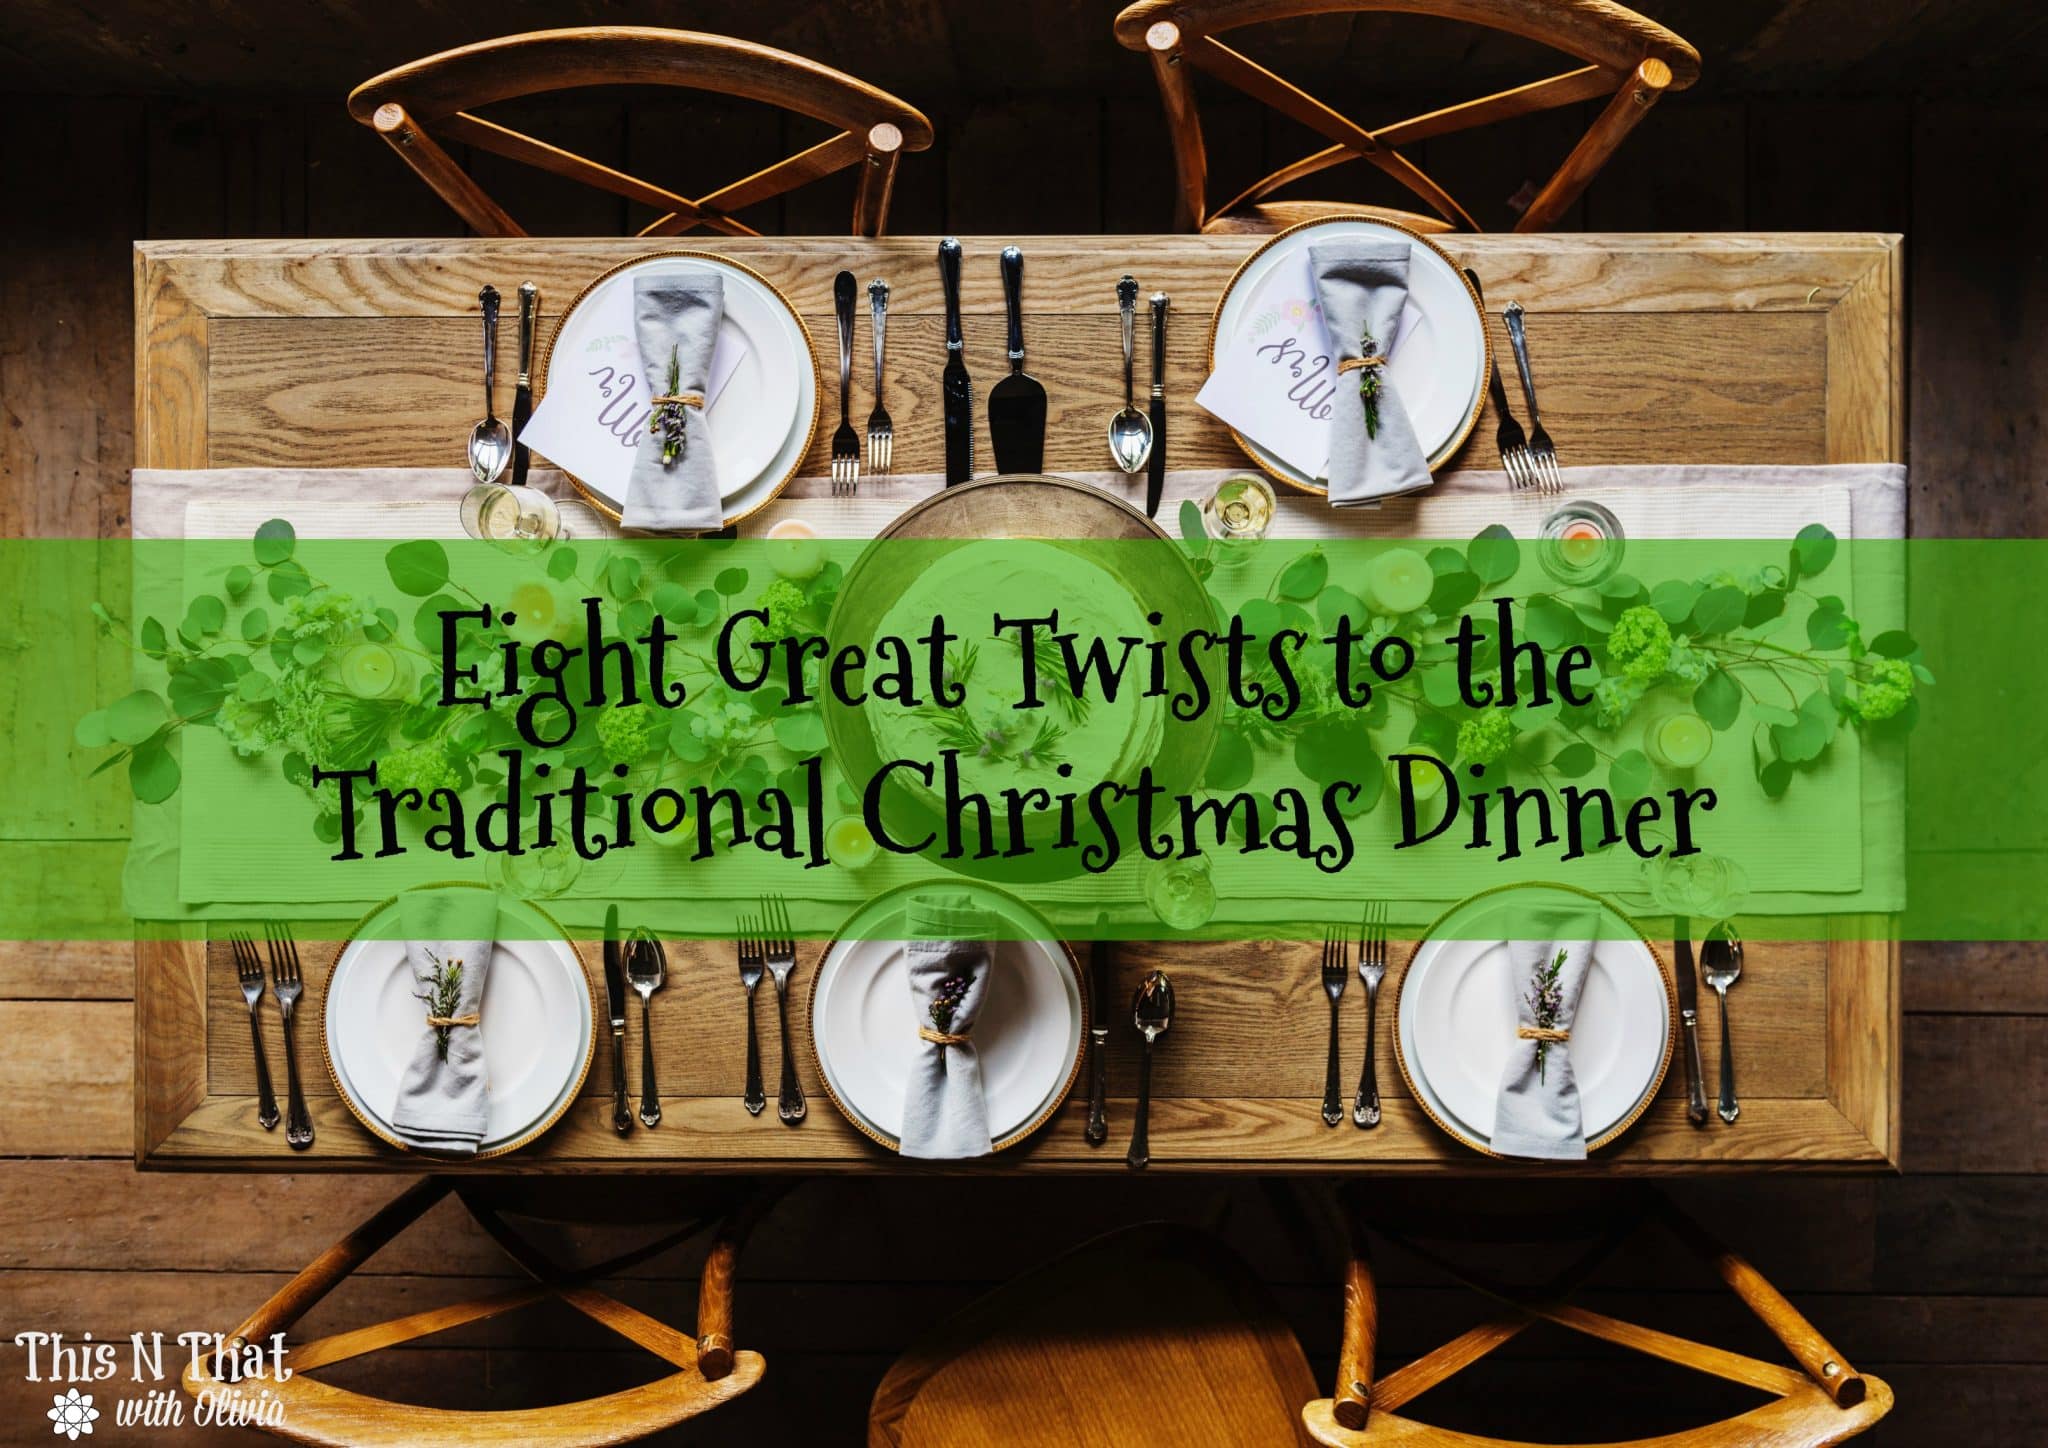 Eight Great Twists to the Traditional Christmas Dinner